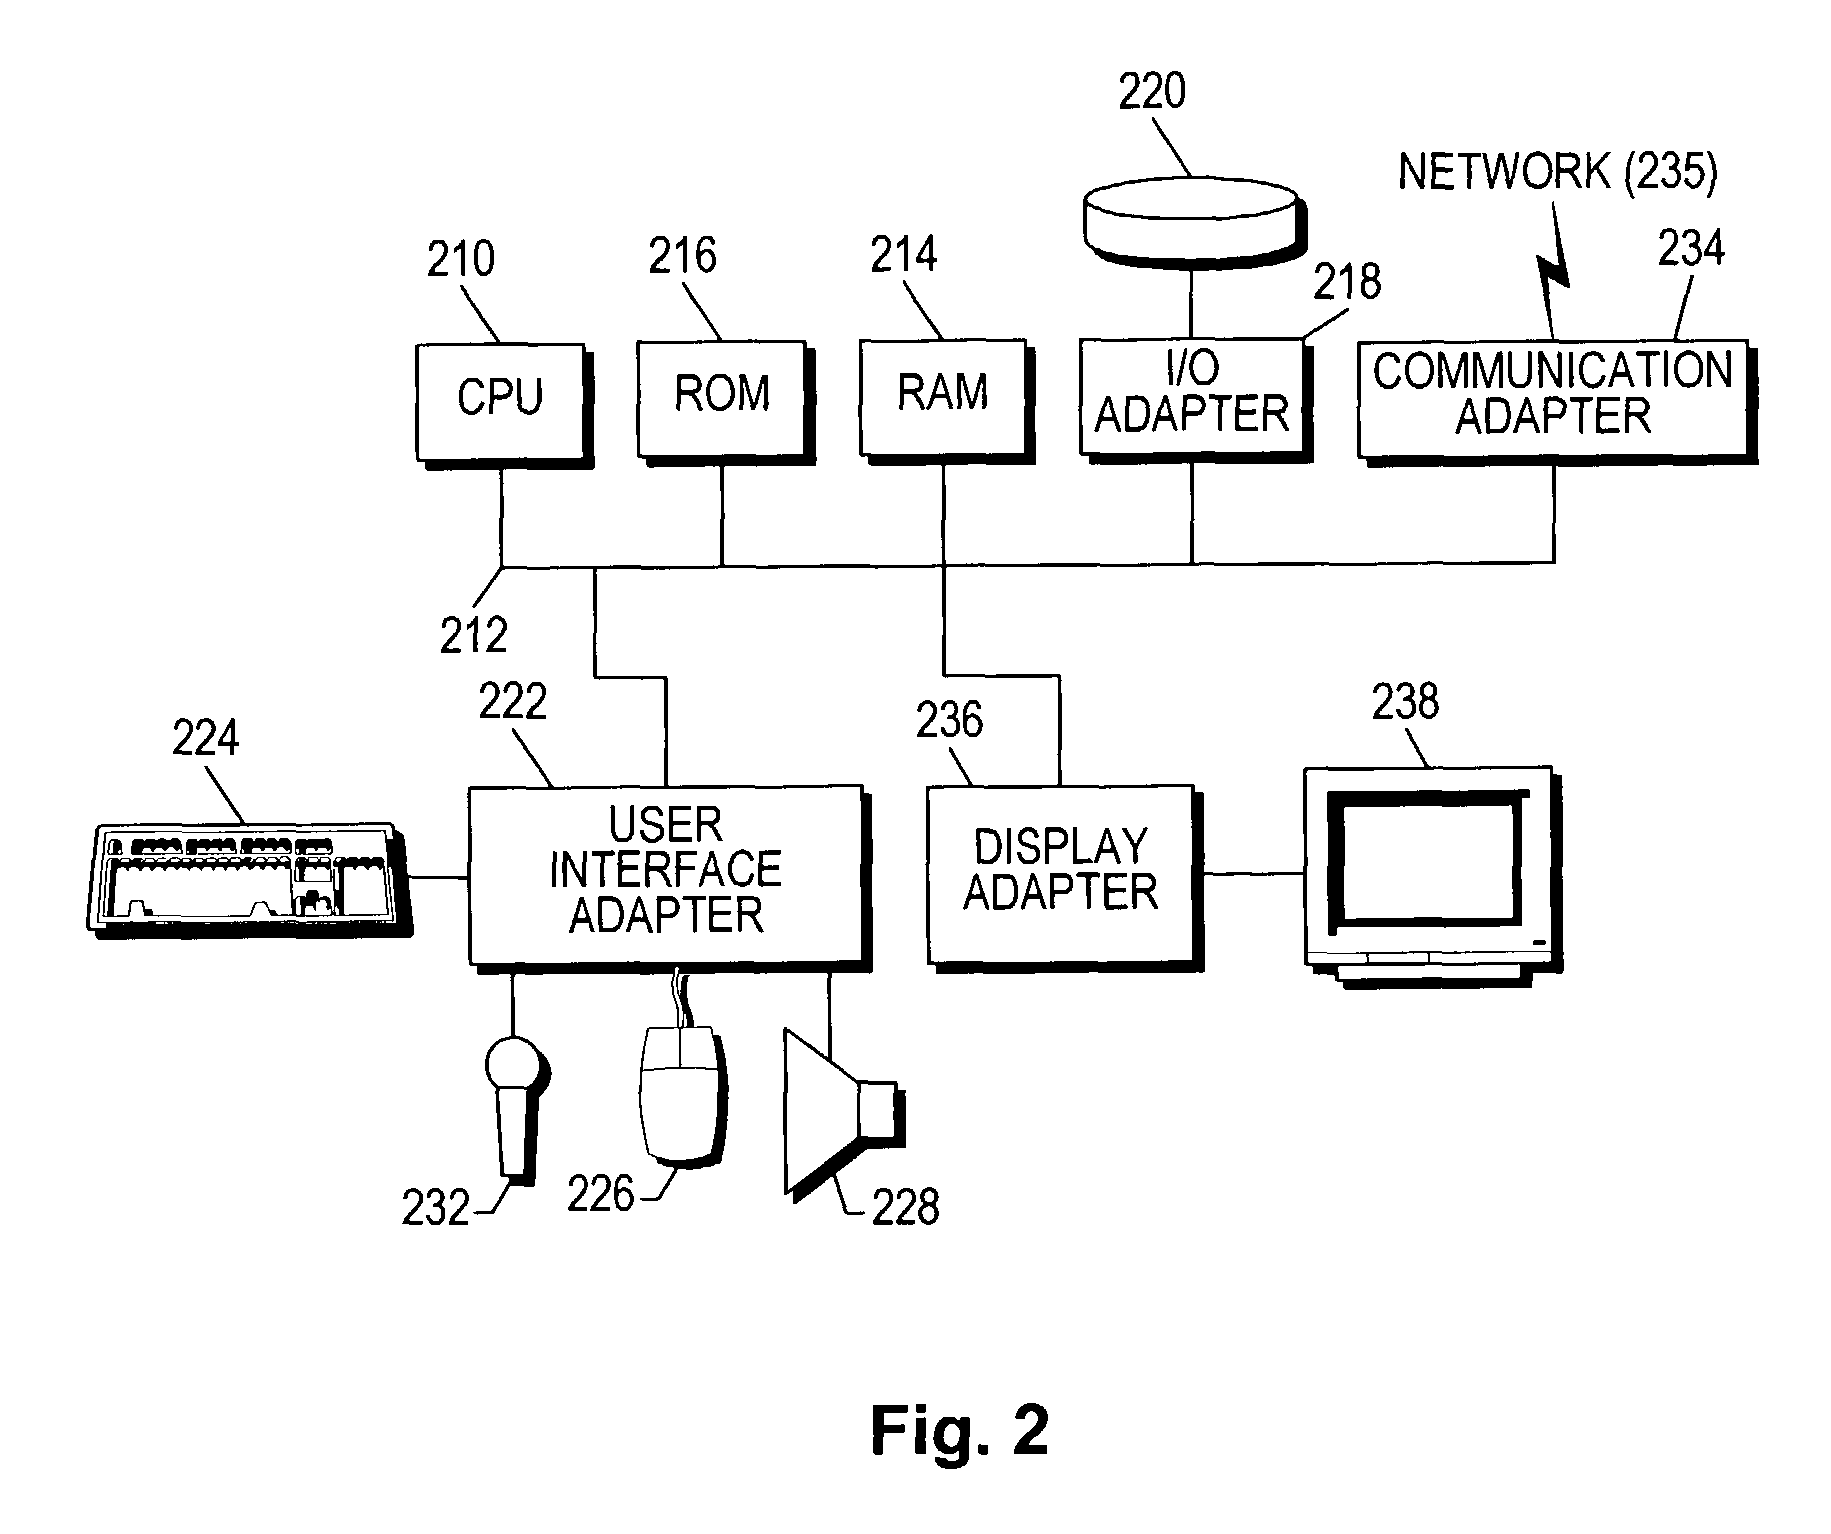 Network analysis system and method utilizing collected metadata